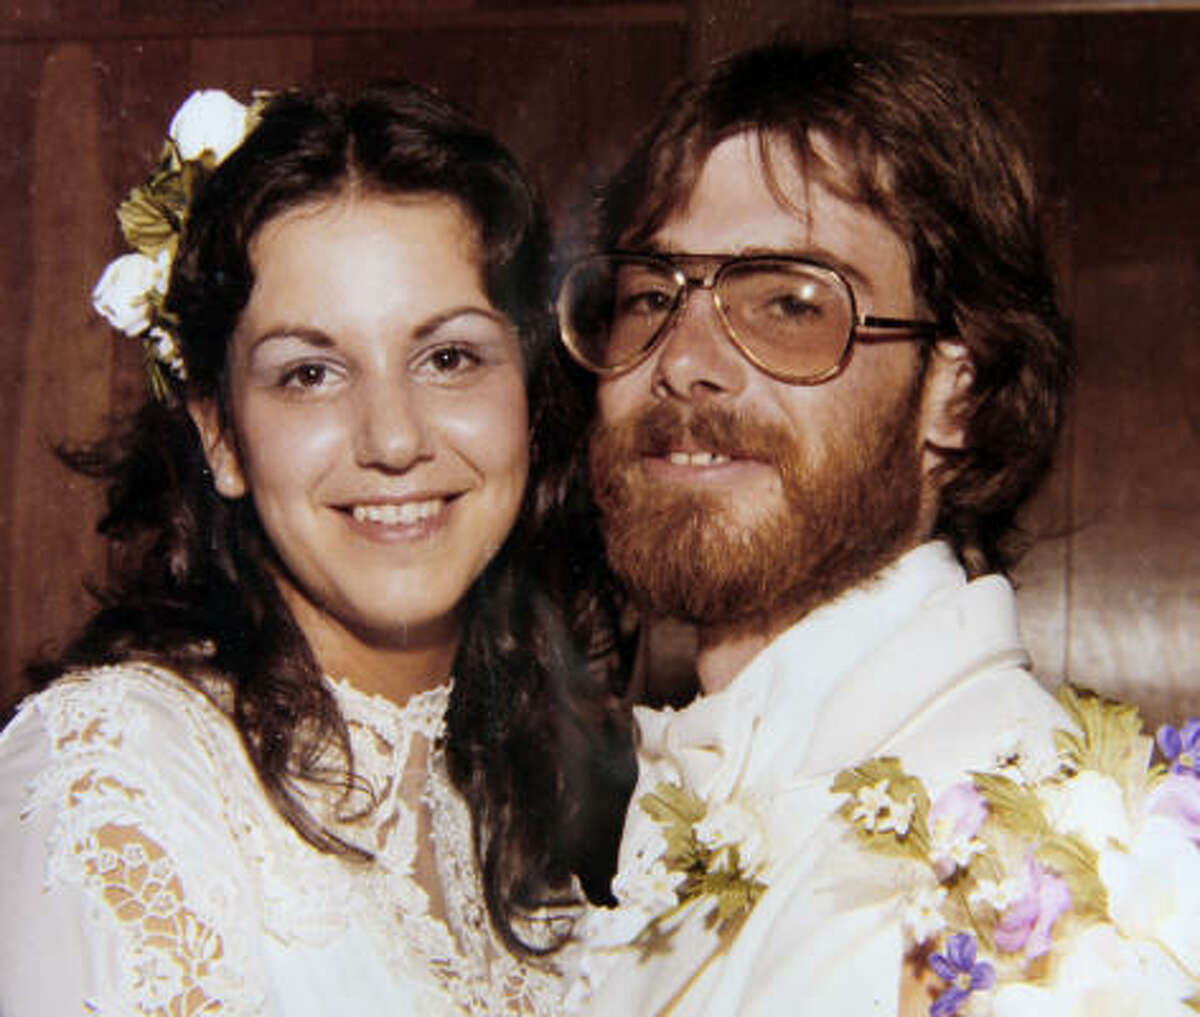 Colleen Schultheis, shown in a 1979 wedding photo with Bob Emery, said she wasn't surprised to learn her ex-husband risked his life to save animals. "That sums up his character," she said.